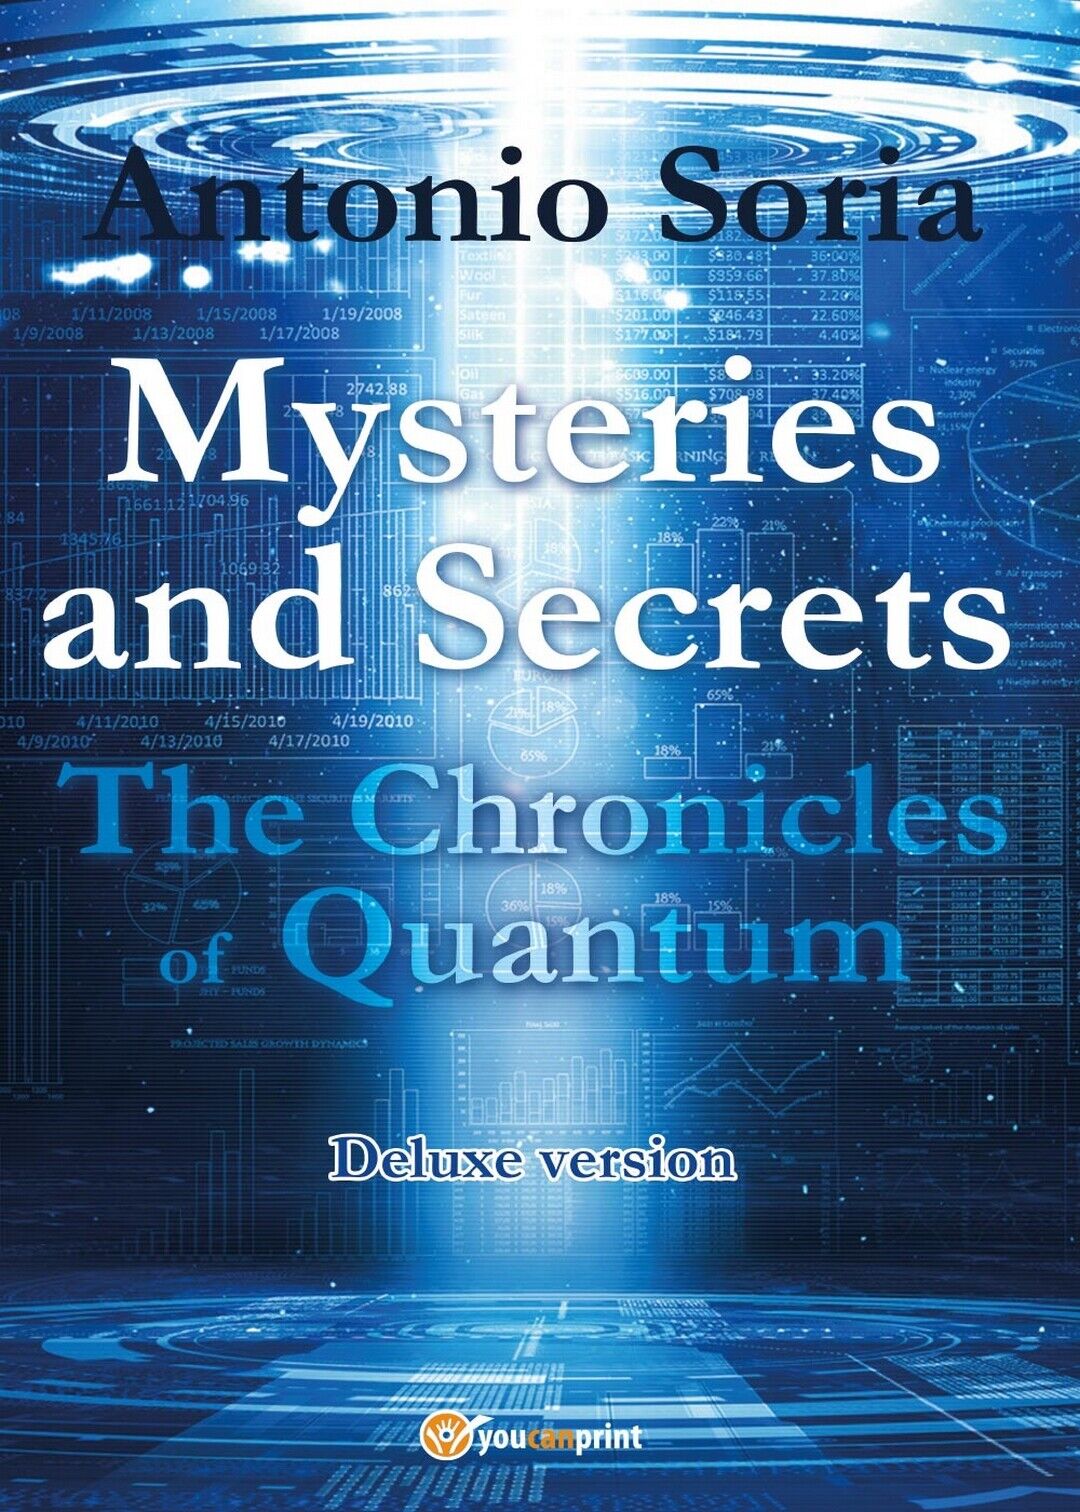 Mysteries and Secrets. The Chronicles of Quantum (Deluxe version) Pocket Edition libro usato